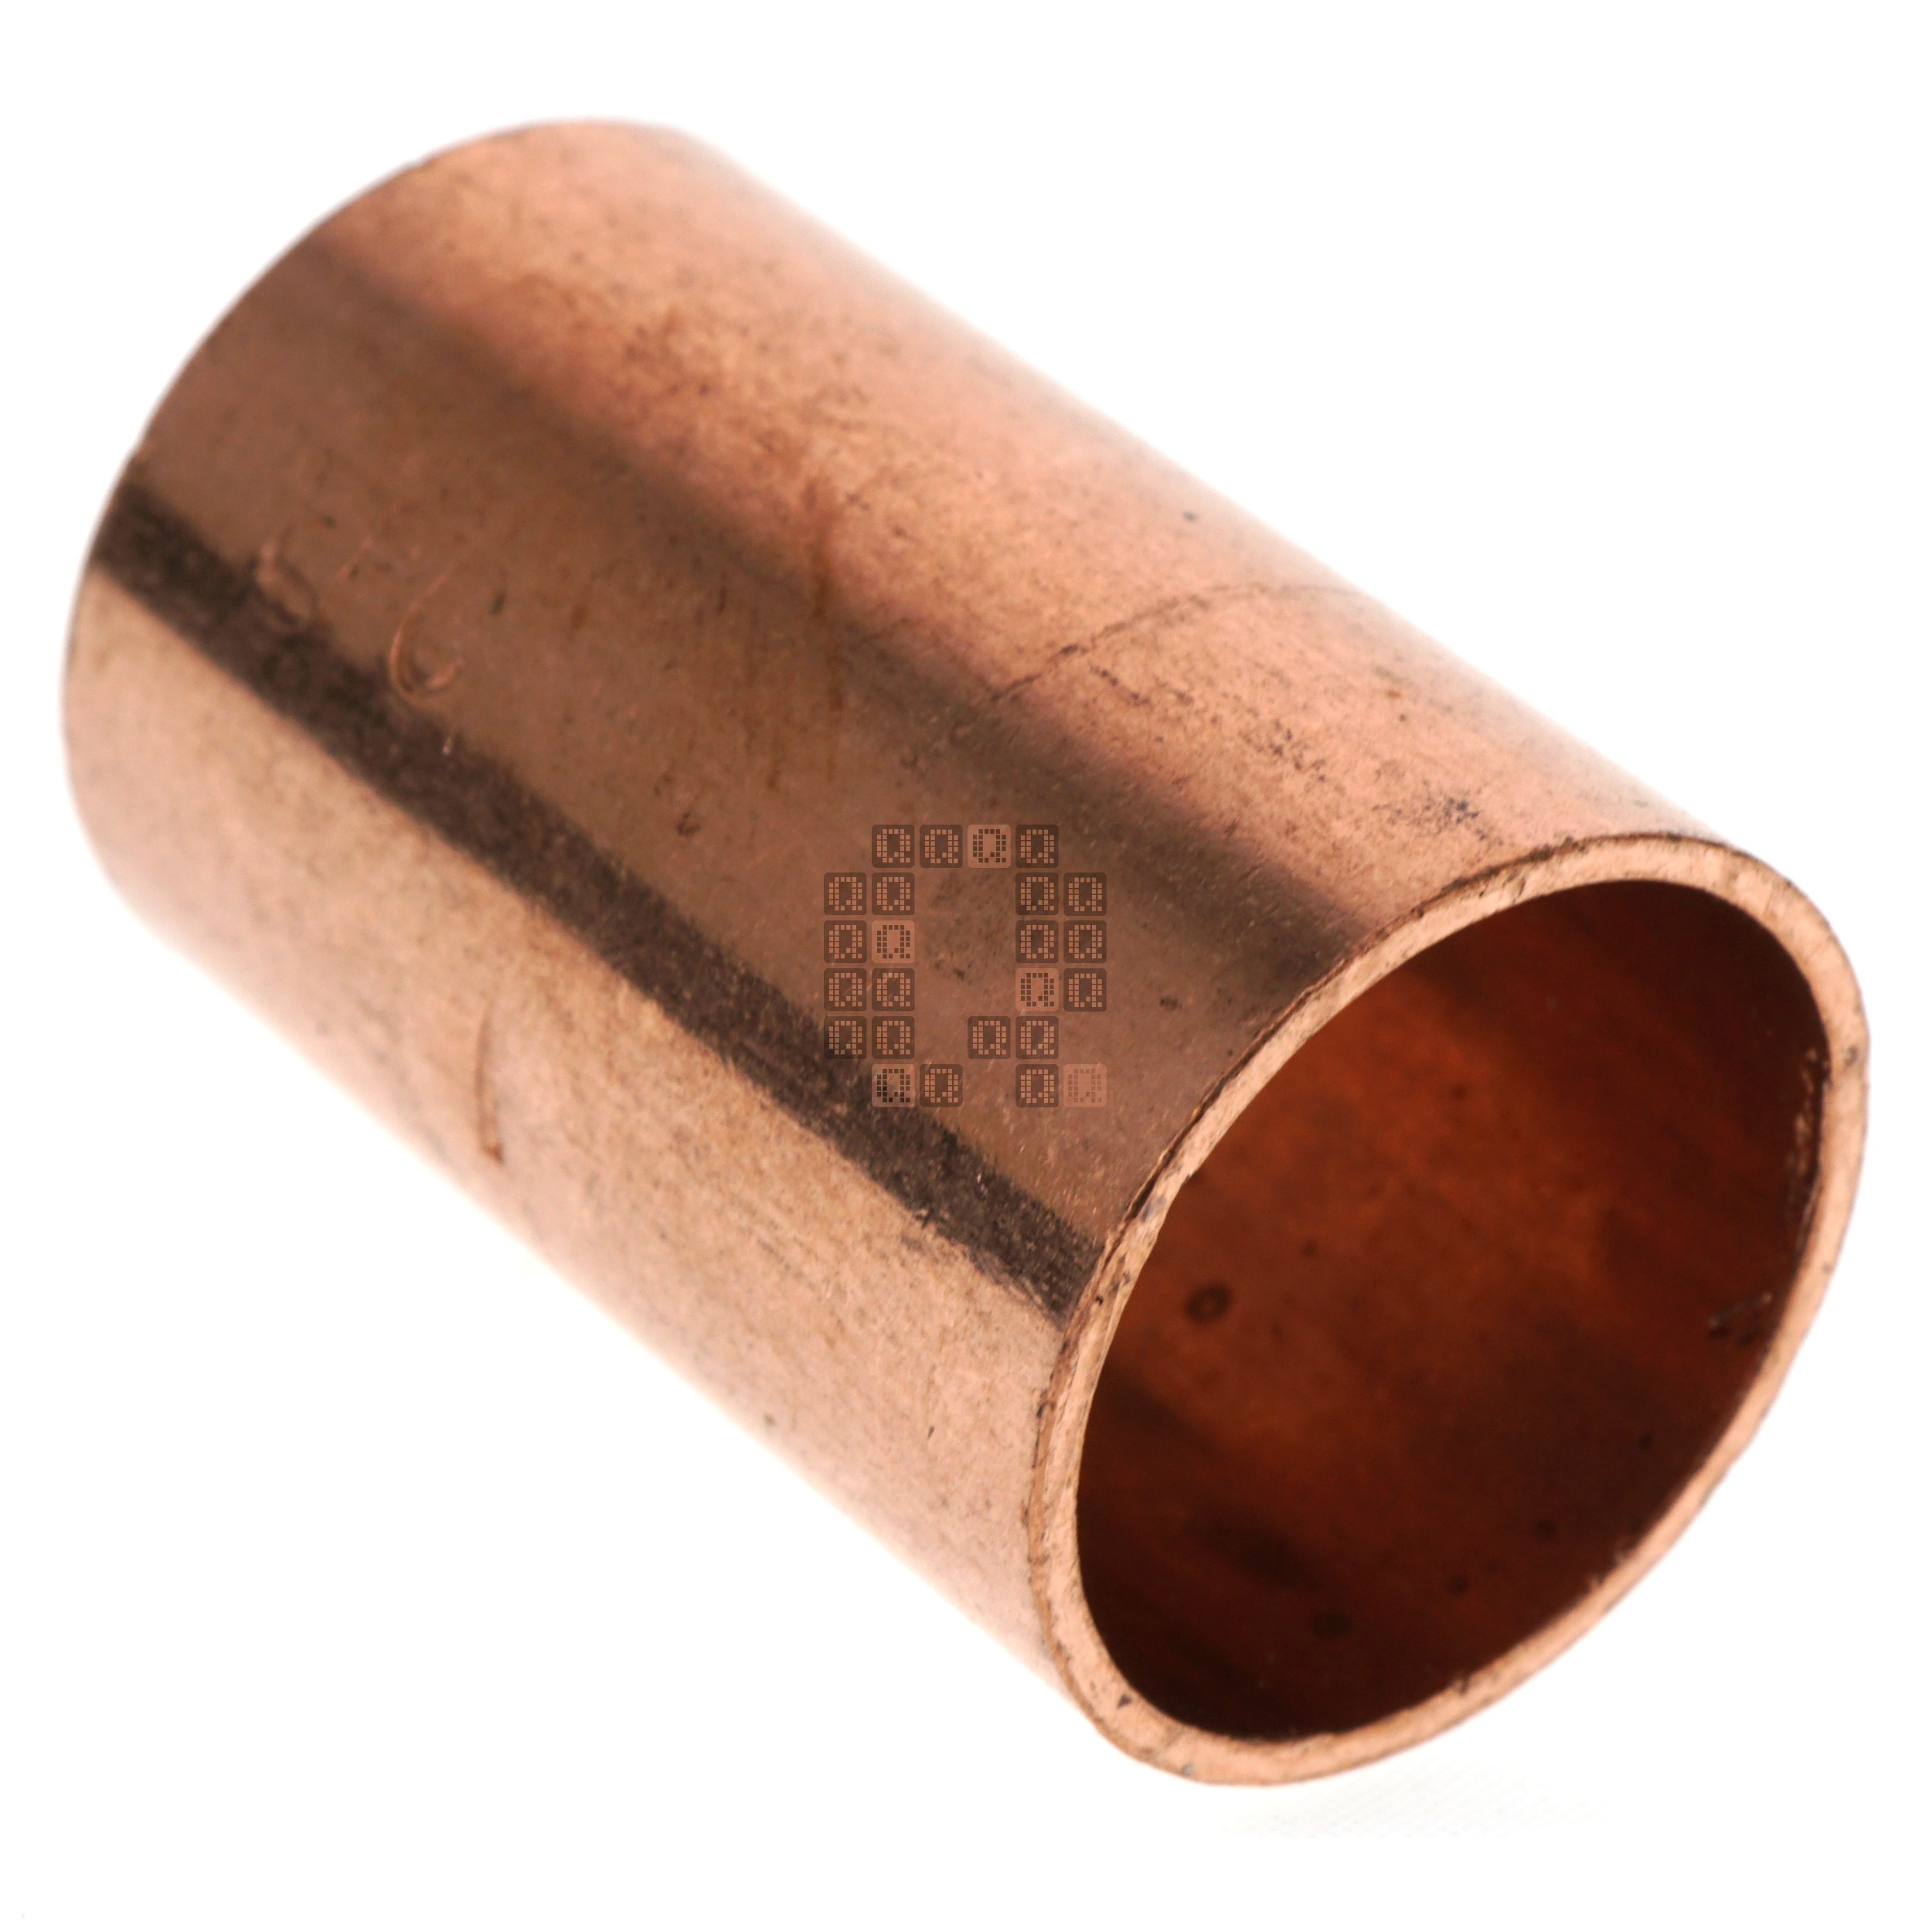 Elkhart Products EPC 30900 1/2" Copper Sweat Pipe Coupling with Stop